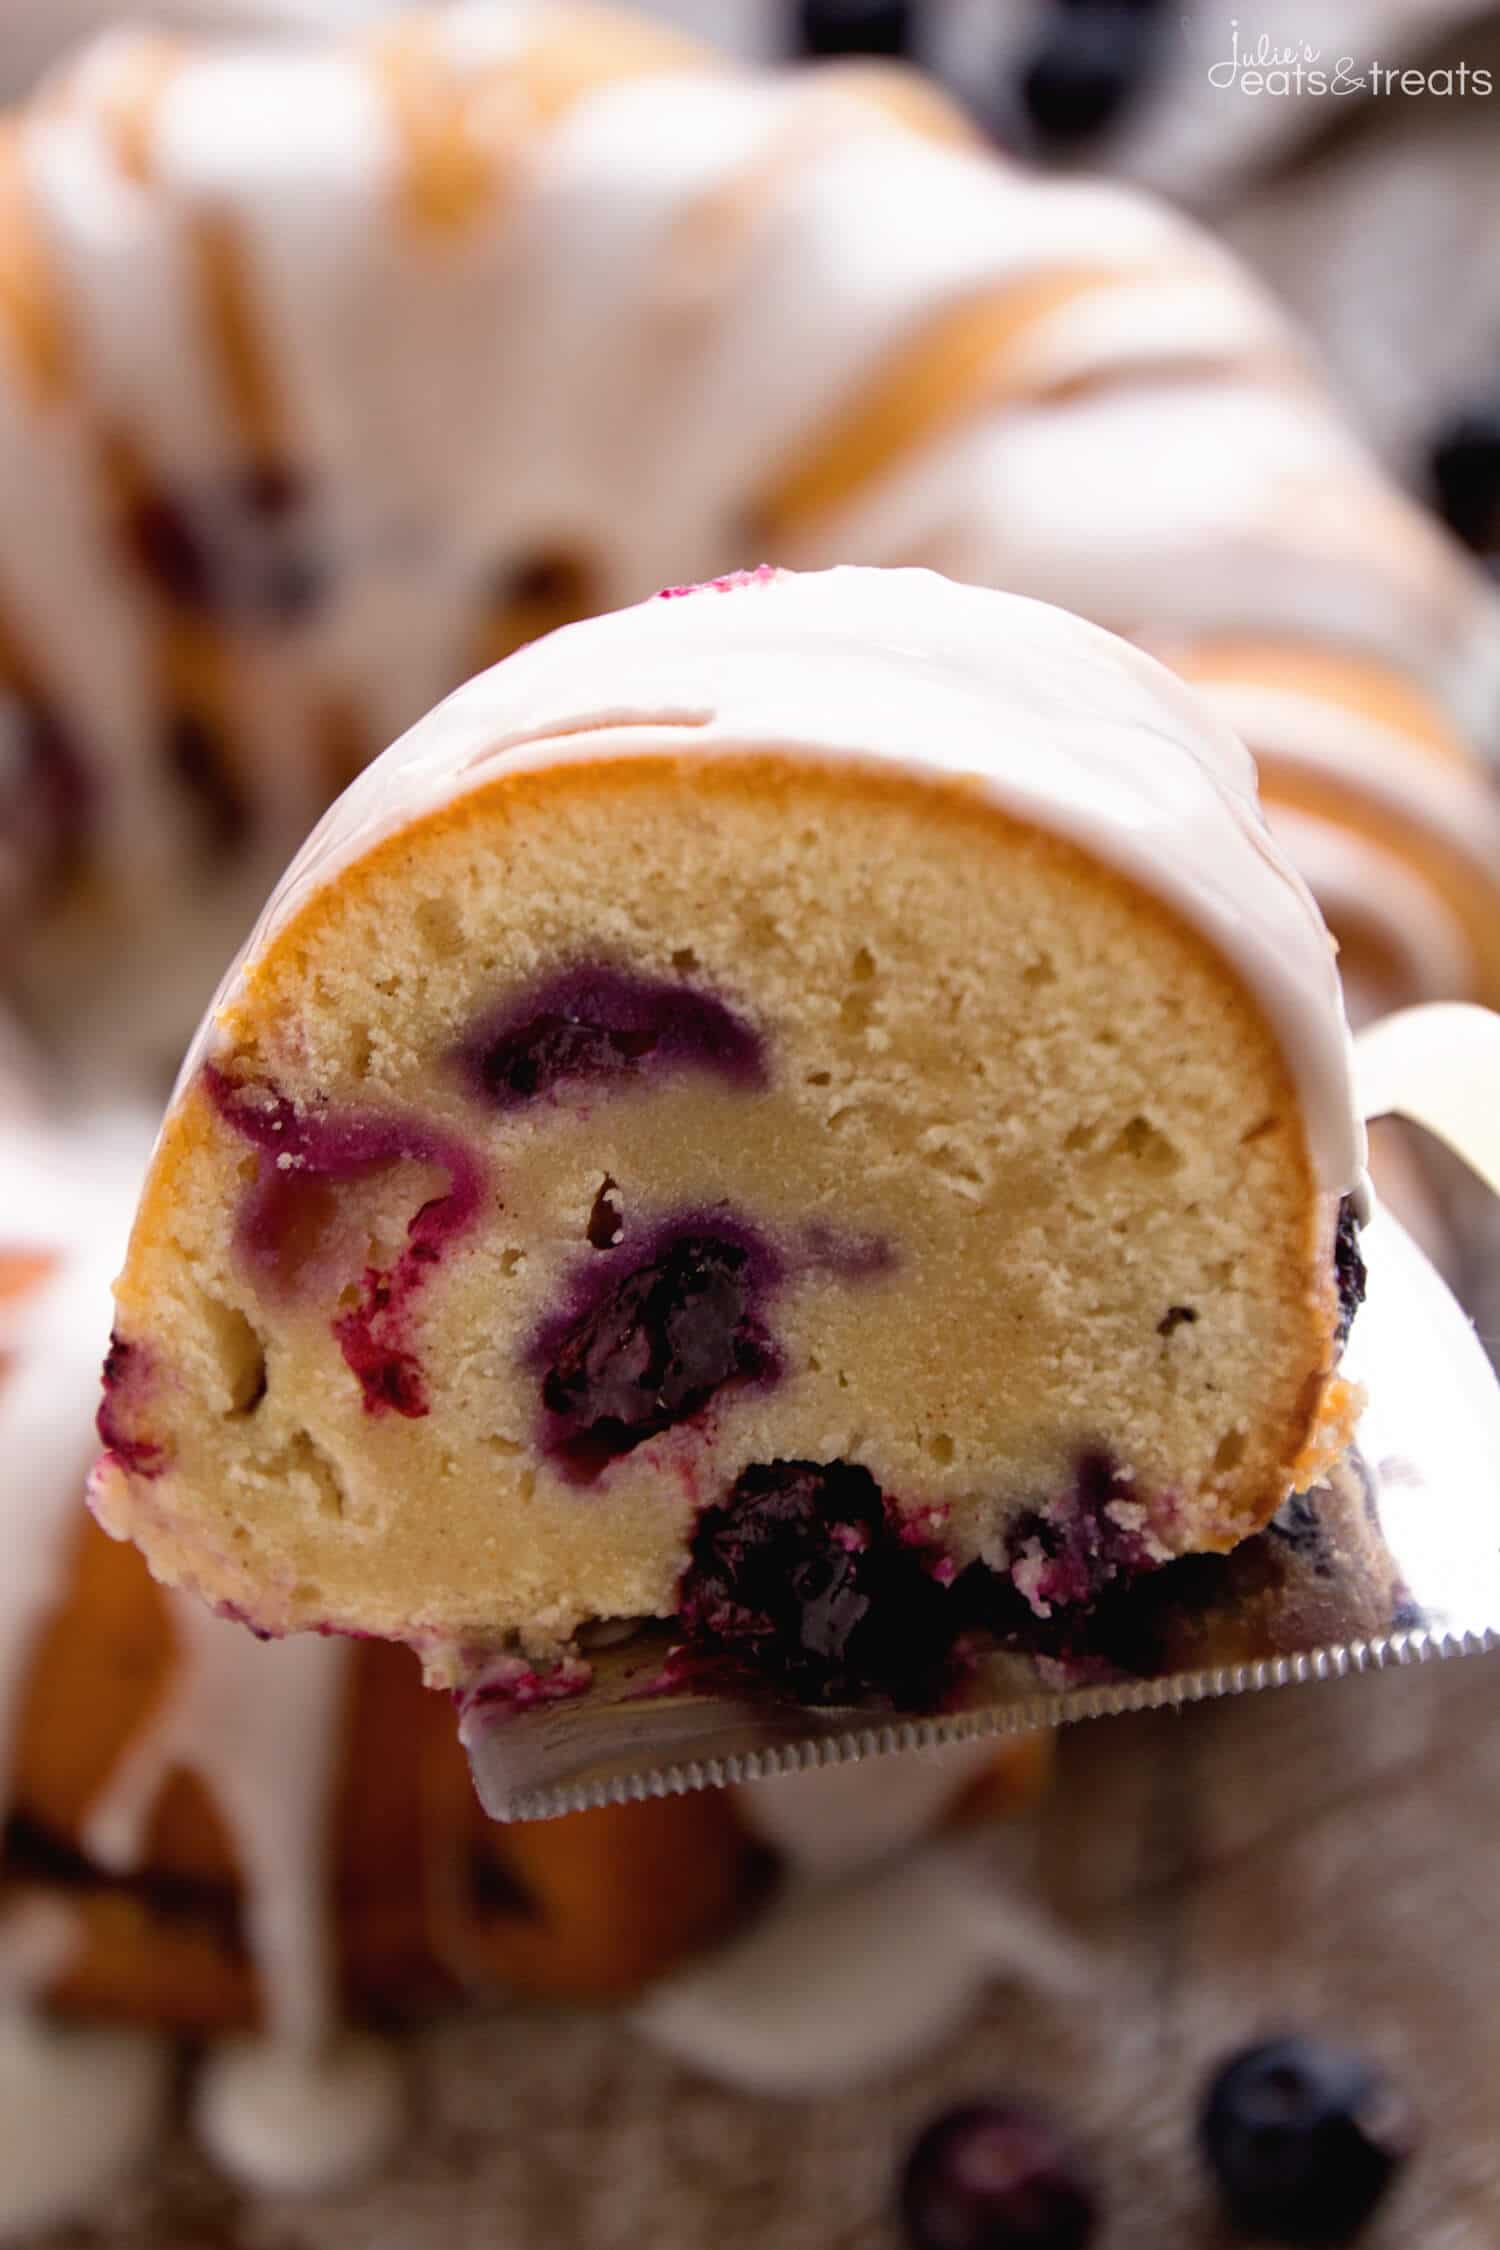 Fresh Blueberry Coffee Cake Recipe ~ Delicious, Moist Blueberry Coffee Cake Loaded with Fresh Blueberries Bursting with Flavor then Drizzled in an Almond Icing!